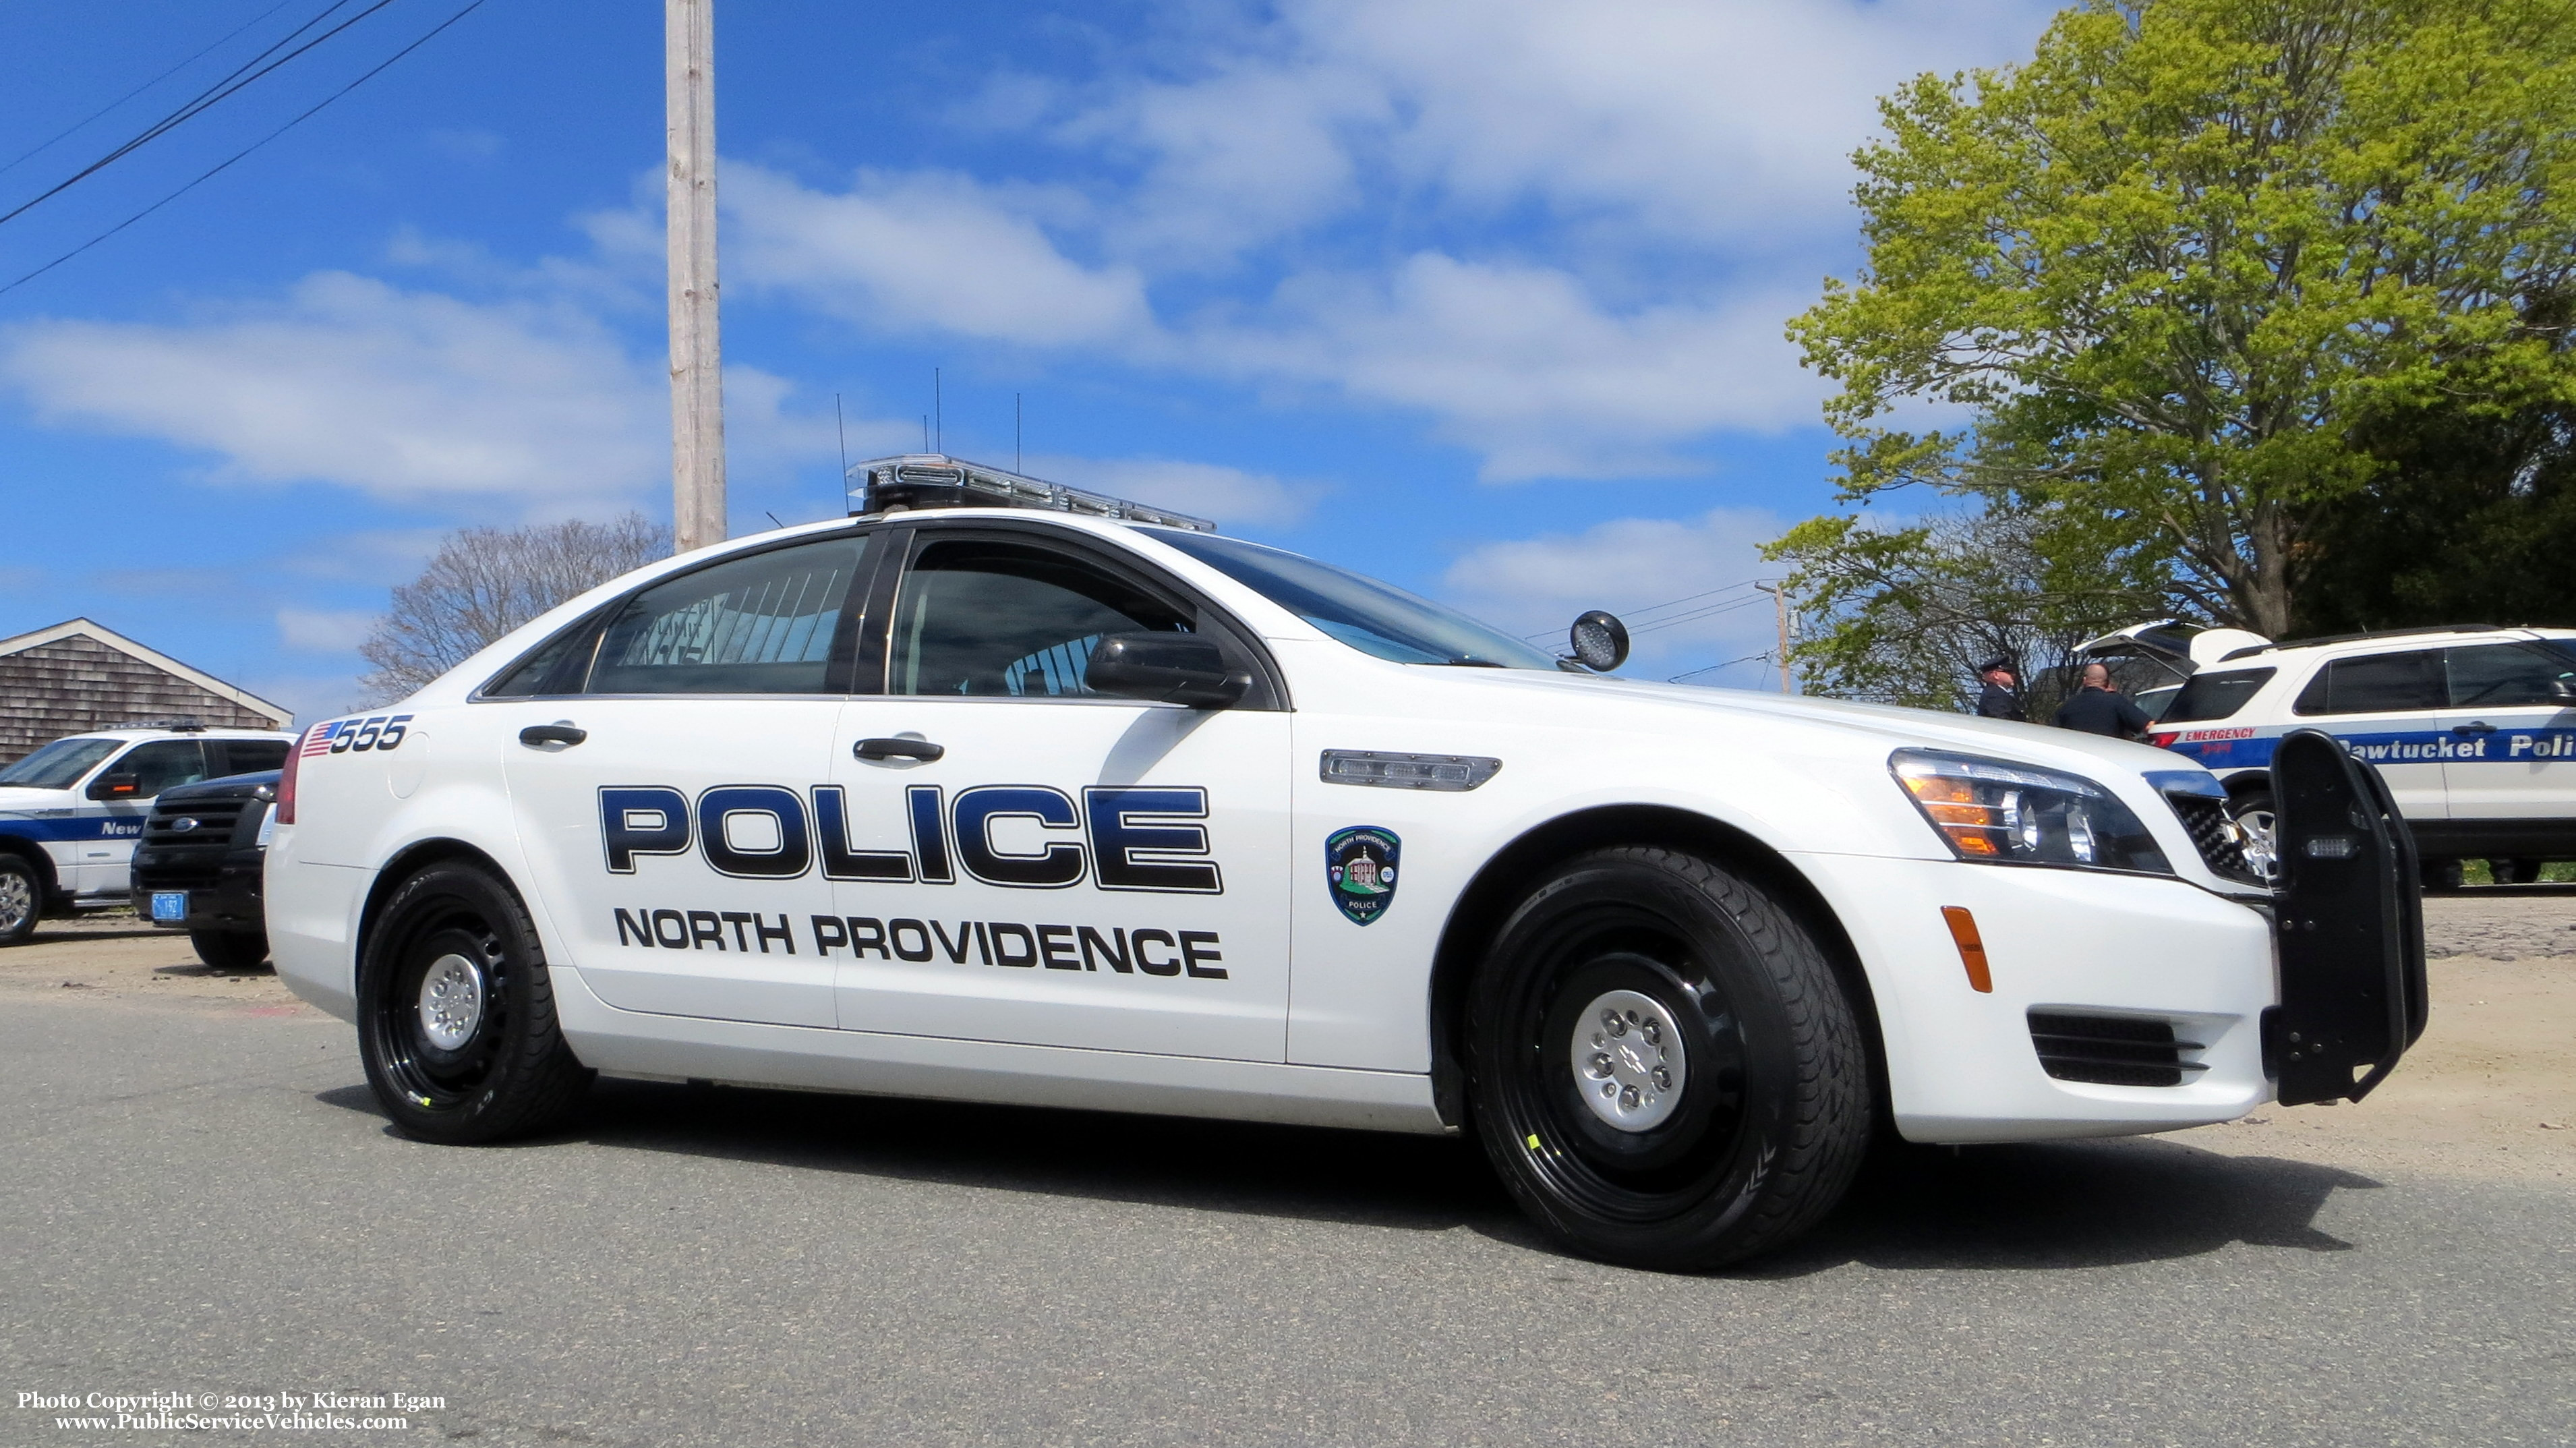 A photo  of North Providence Police
            Cruiser 555, a 2012 Chevrolet Caprice             taken by Kieran Egan